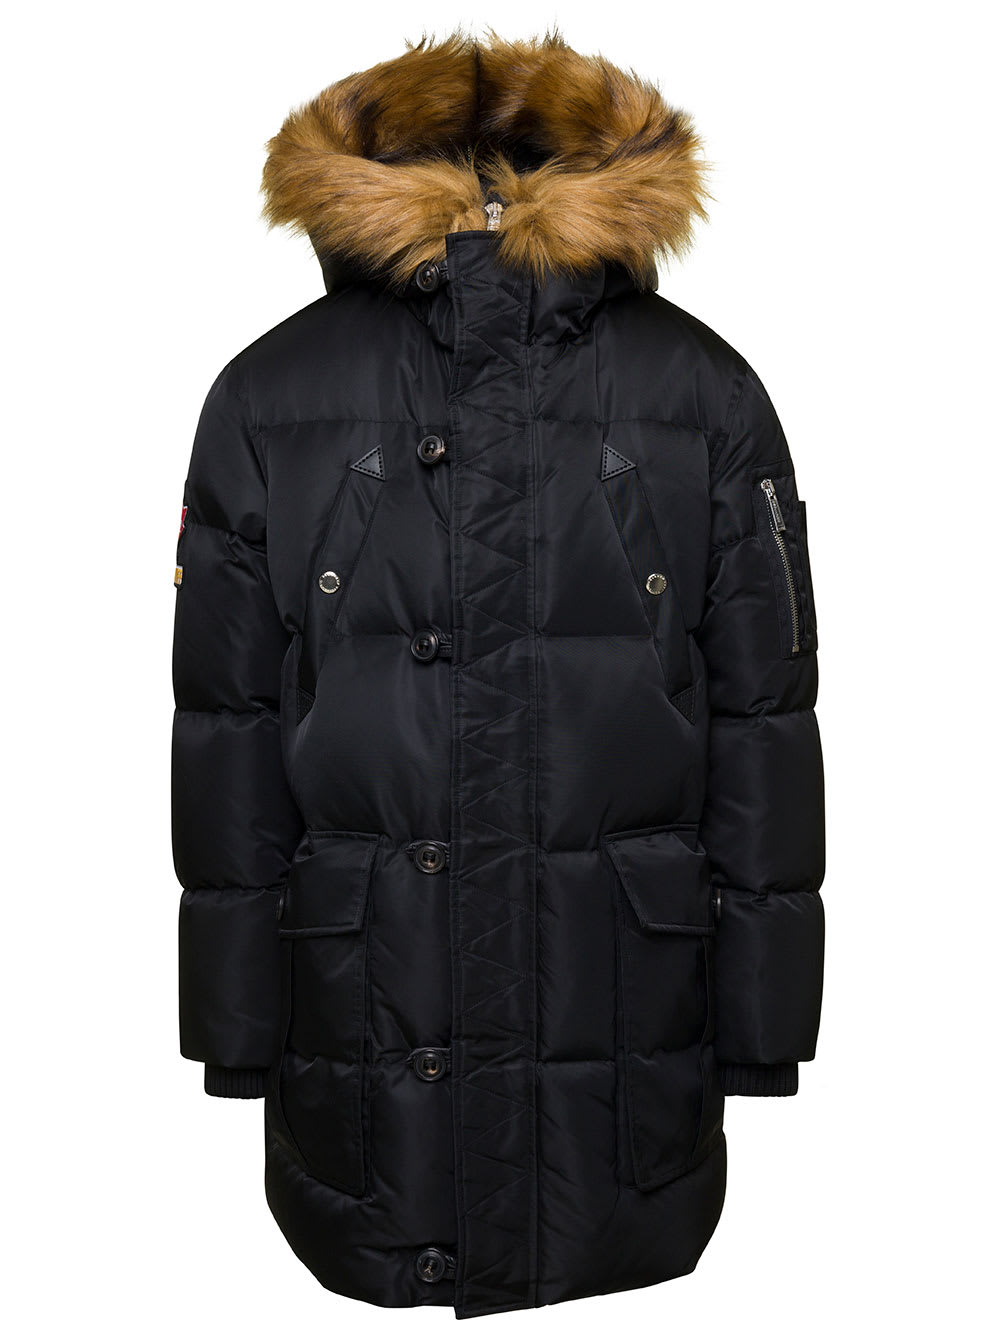 DSQUARED2 BLACK HOODED PARKA JACKET WITH LOGO PATCH IN NYLON MAN